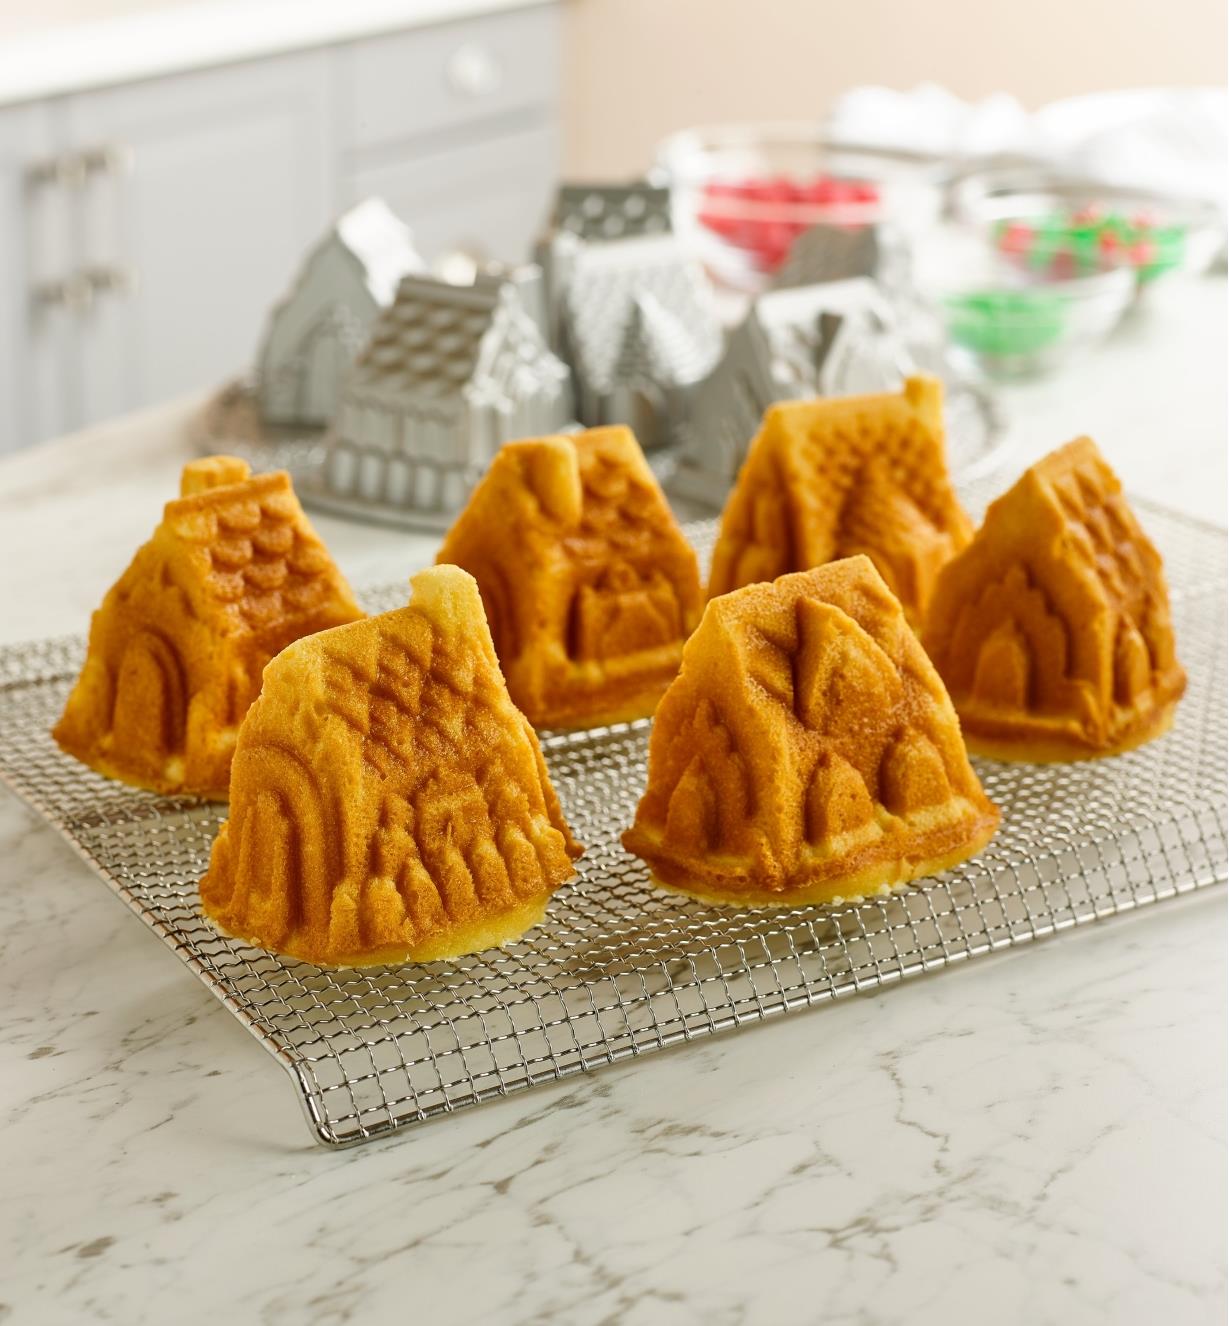 Six house-shaped cakes on a cooling rack, with the cozy village pan in the background